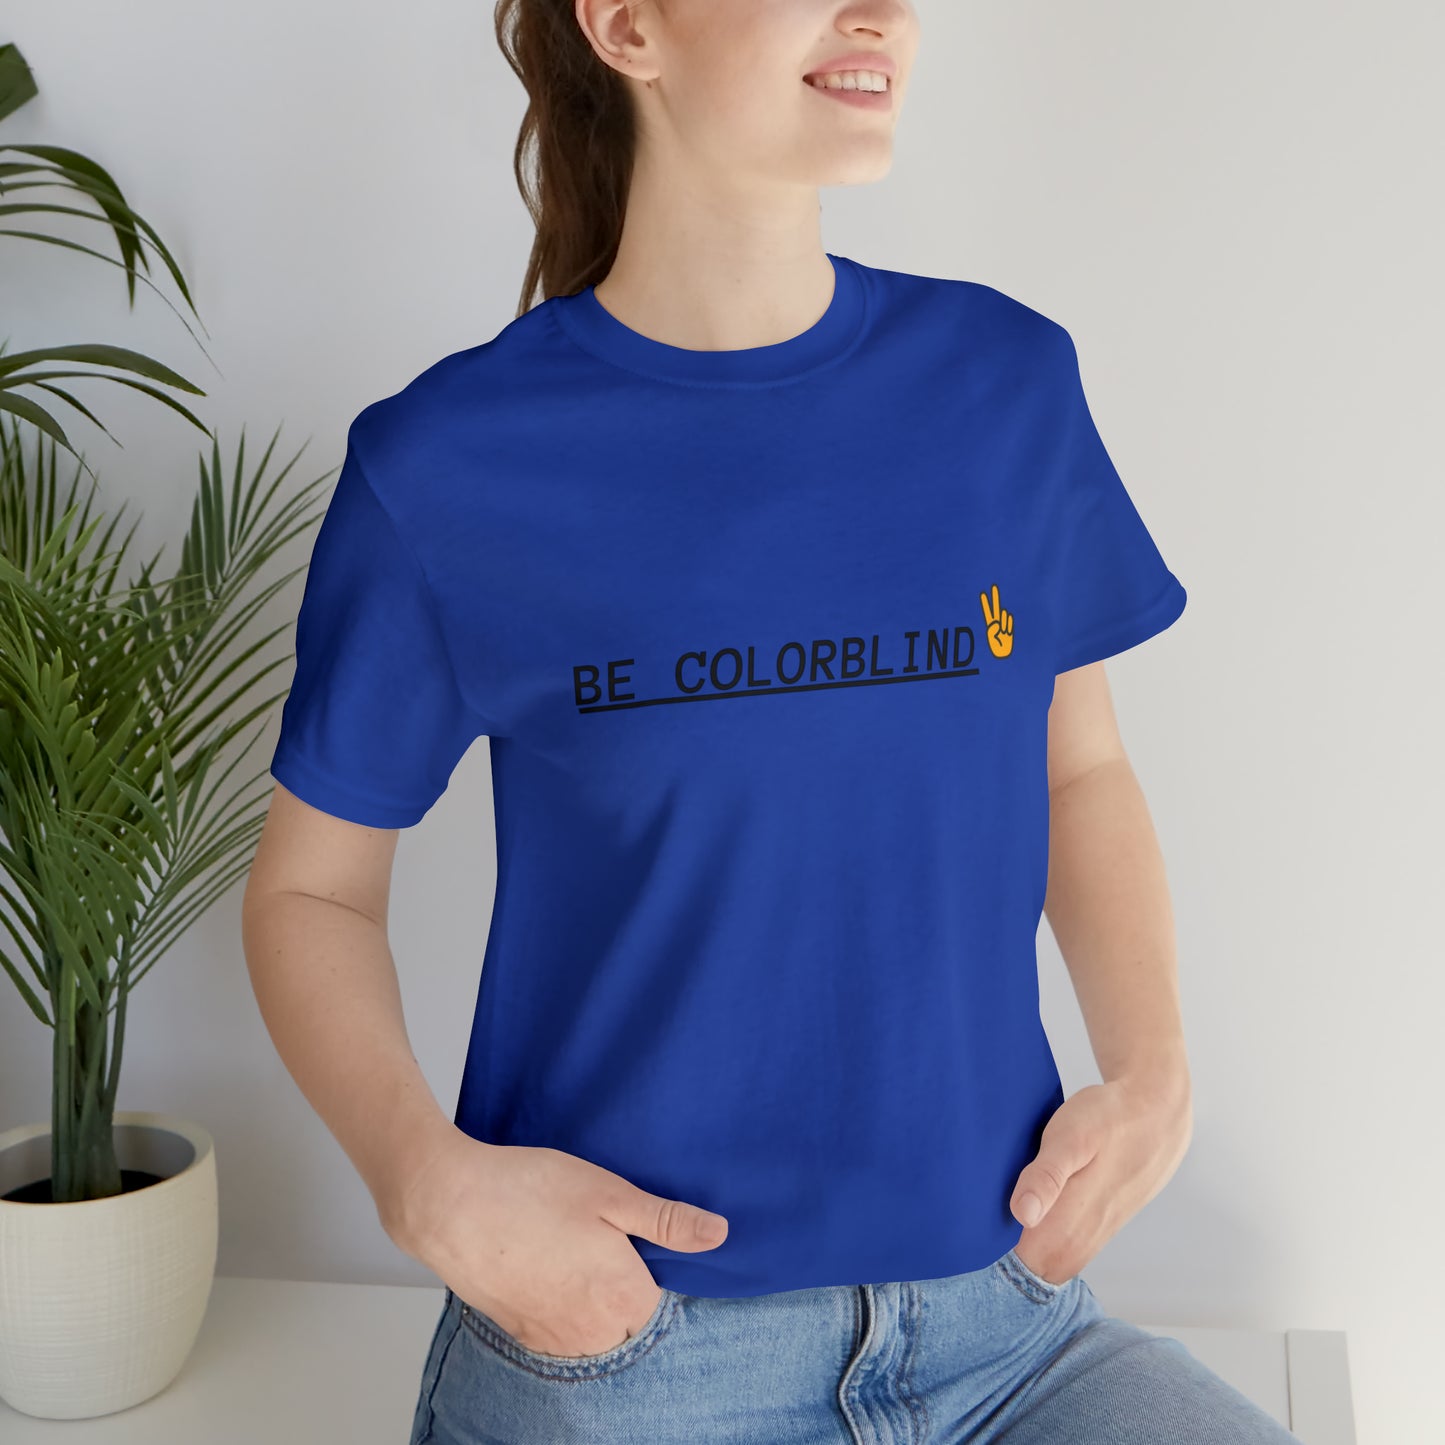 BE COLORBLIND Unisex Jersey Short Sleeve Tee